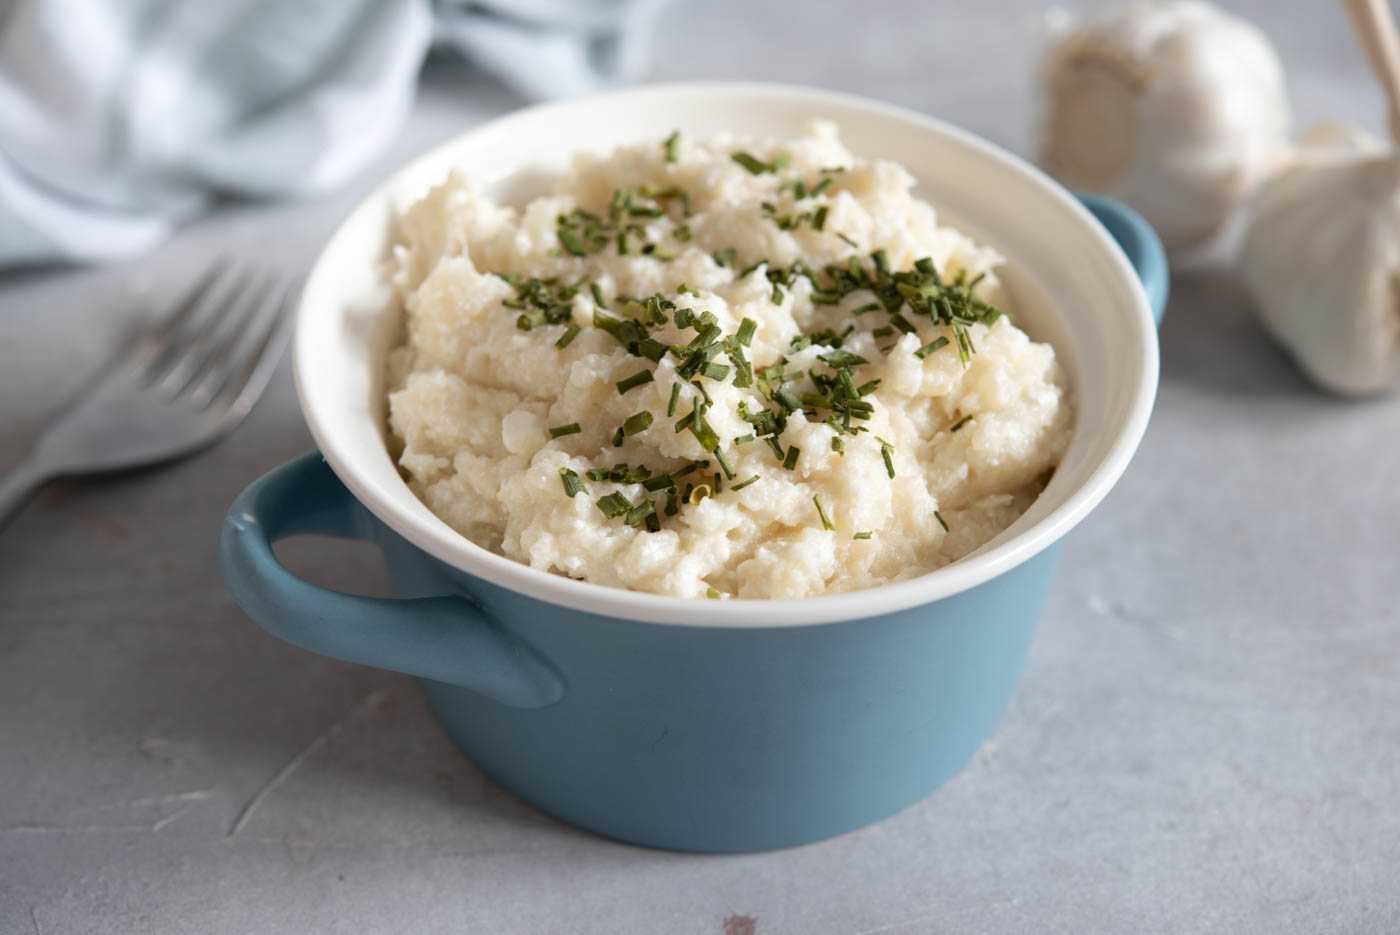 Cauliflower Mush served in a blue bowl topped with chopped chives and whole garlic on side